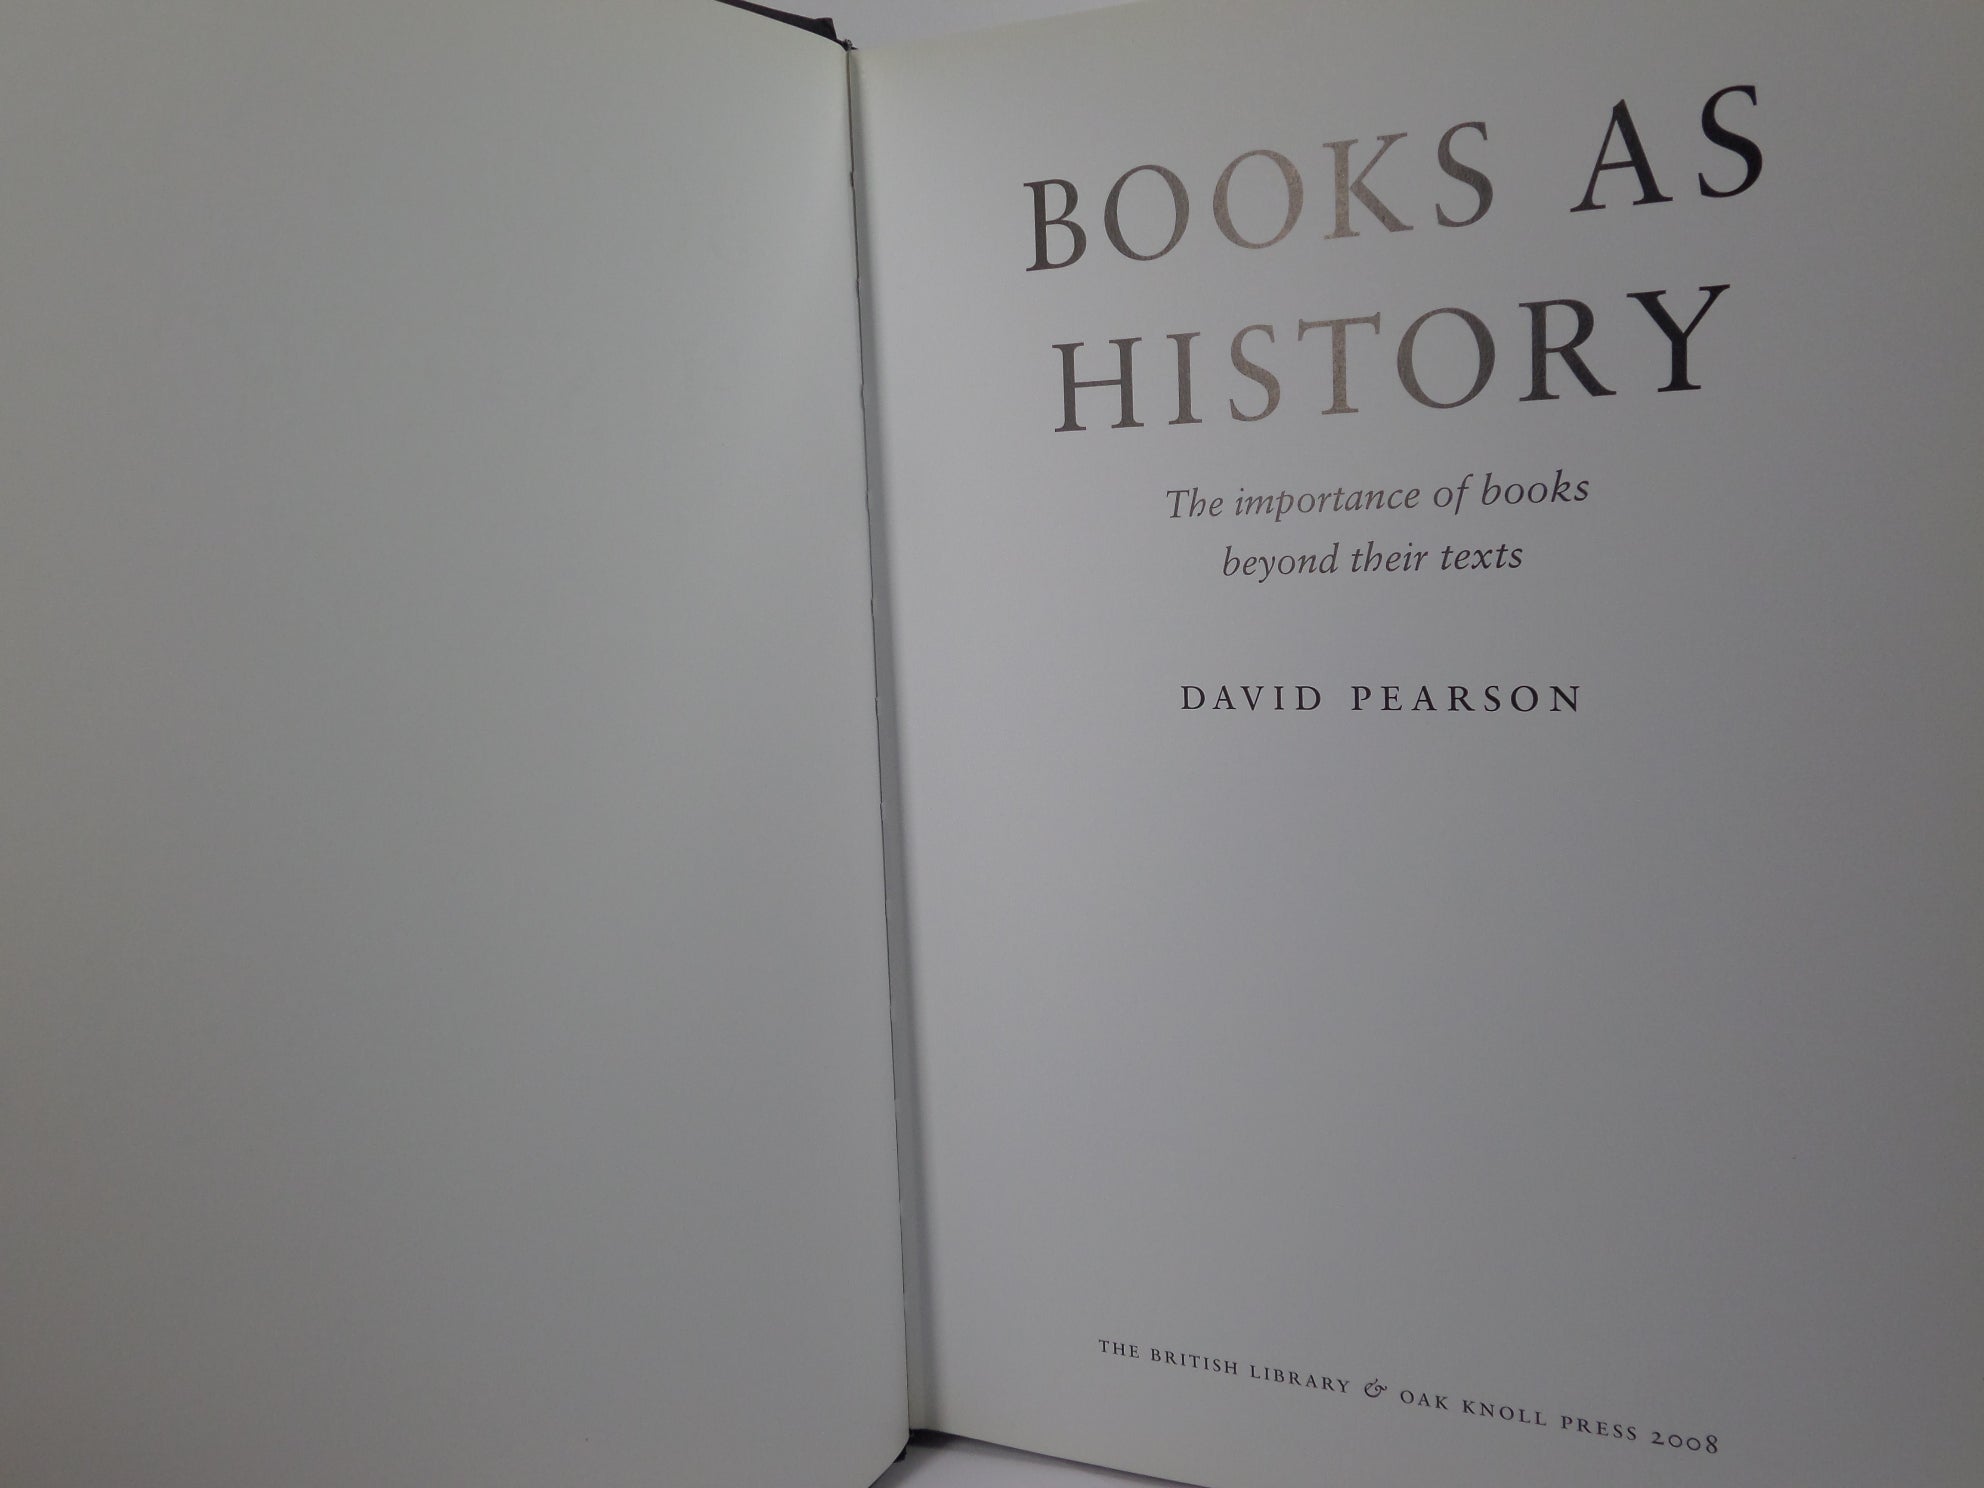 BOOKS AS HISTORY: THE IMPORTANCE OF BOOKS BEYOND THEIR TEXTS BY DAVID PEARSON